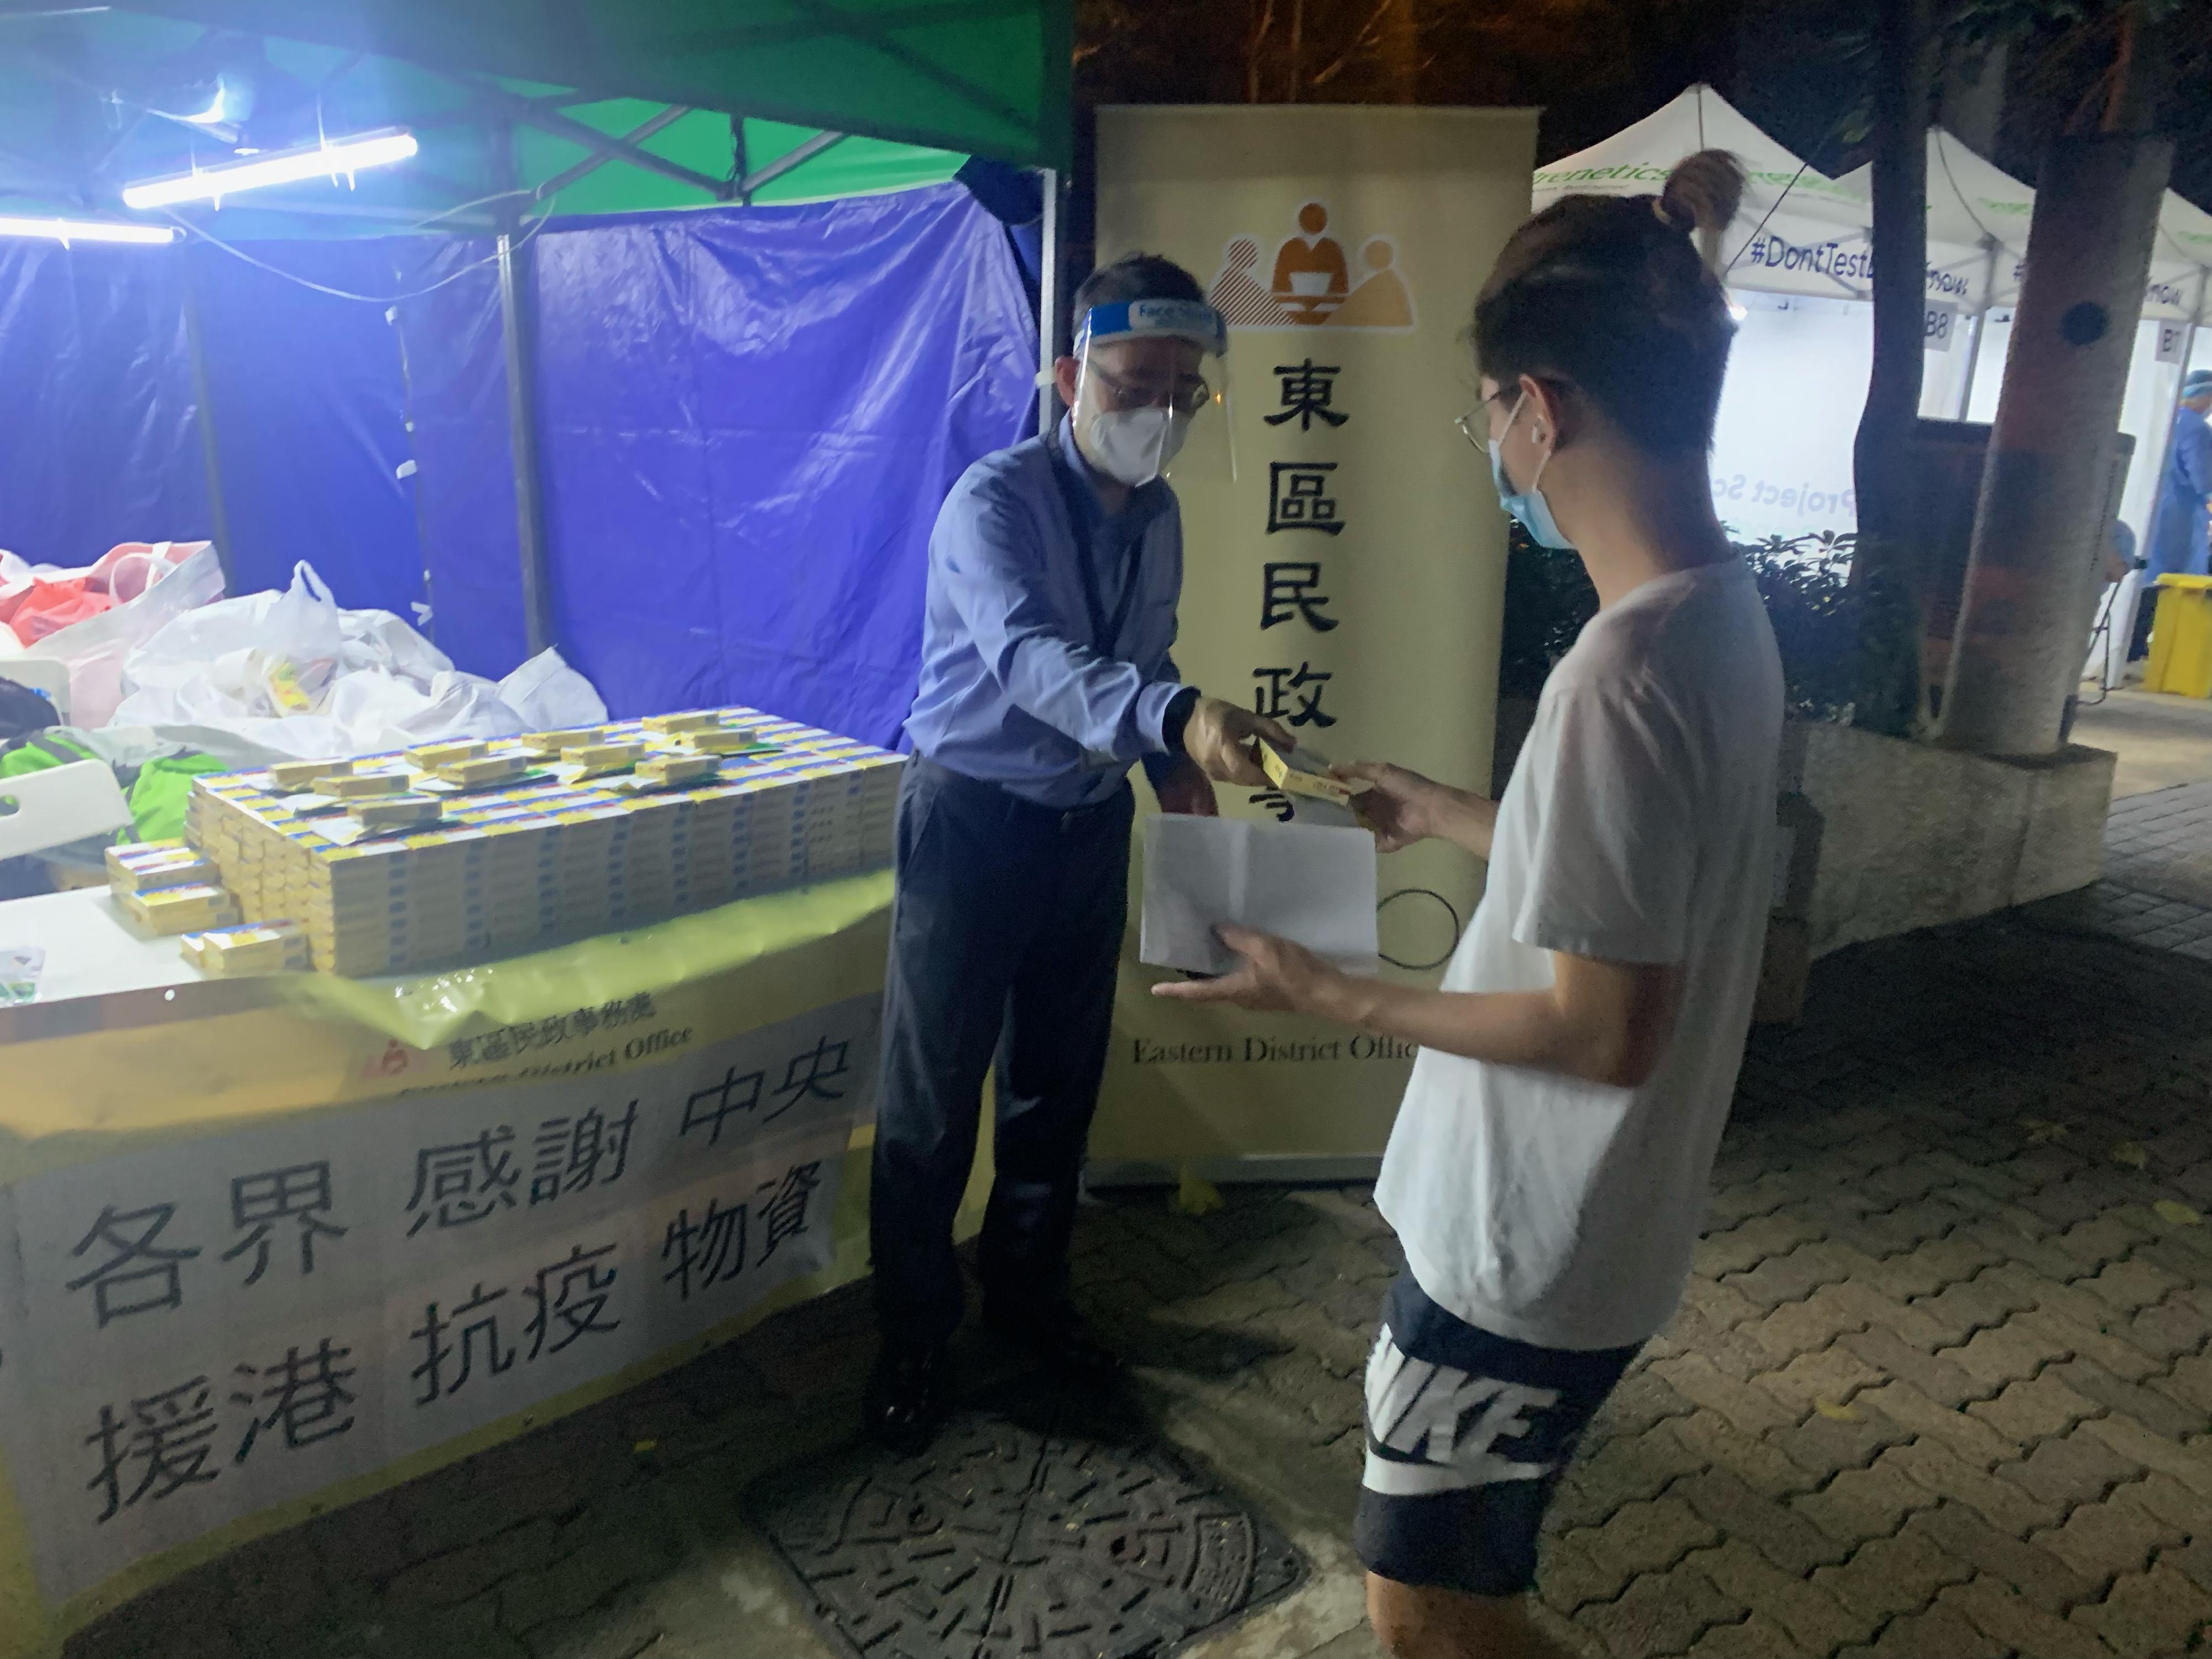 The Government yesterday (May 20) made a "restriction-testing declaration" and issued a compulsory testing notice in respect of the specified "restricted area" in Siu Sai Wan (i.e. Ngar Tsui House, Hiu Tsui Court, Siu Sai Wan), under which people within the specified "restricted area" in Siu Sai Wan were required to stay in their premises and undergo compulsory testing. Photo shows the District Officer (Eastern), Mr Simon Chan (left), distributing anti-epidemic proprietary Chinese medicines donated by the Central People's Government or procured with the co-ordination of the Central People's Government to a person subject to compulsory testing in the "restricted area".